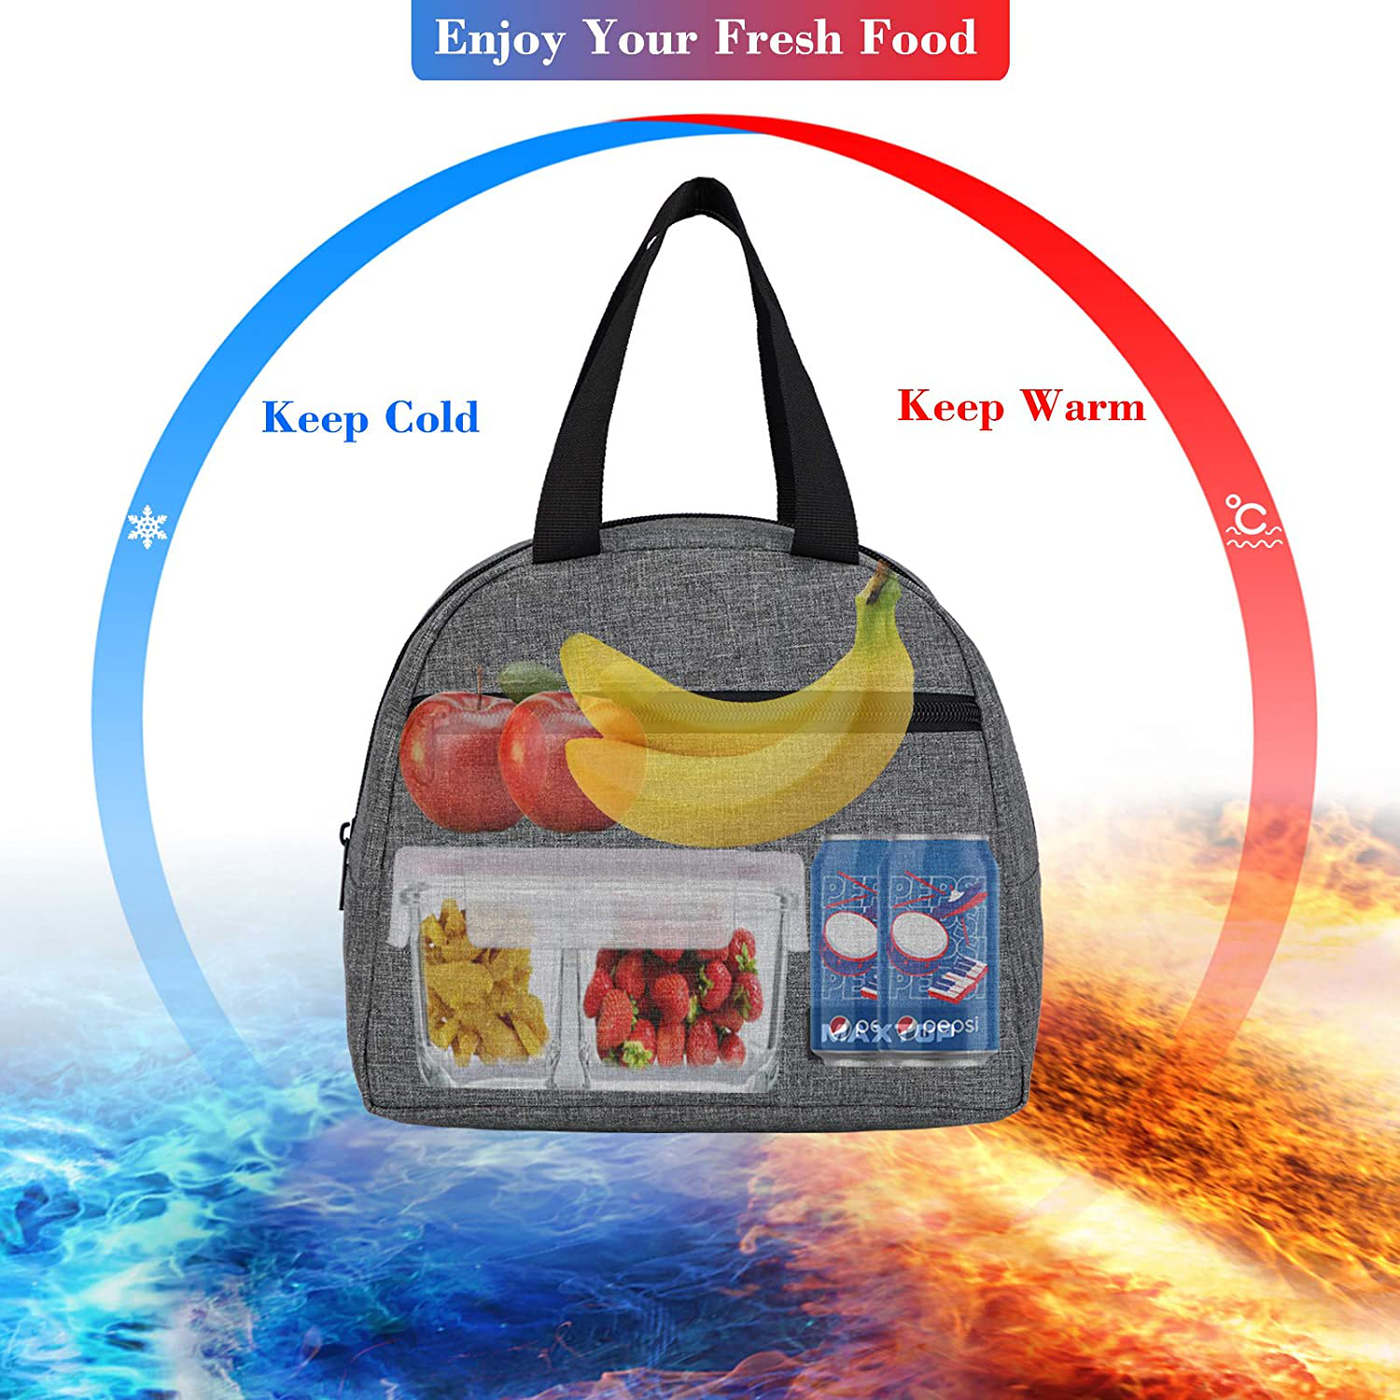 Lunch Bags for Women,Insulated Thermal Lunch Box Bag for men With Front Pocket and Inner Mesh pocket, Cooler Tote Bag Gifts for Adults Women Men Work College Picnic Beach Park School (Grey, Large)